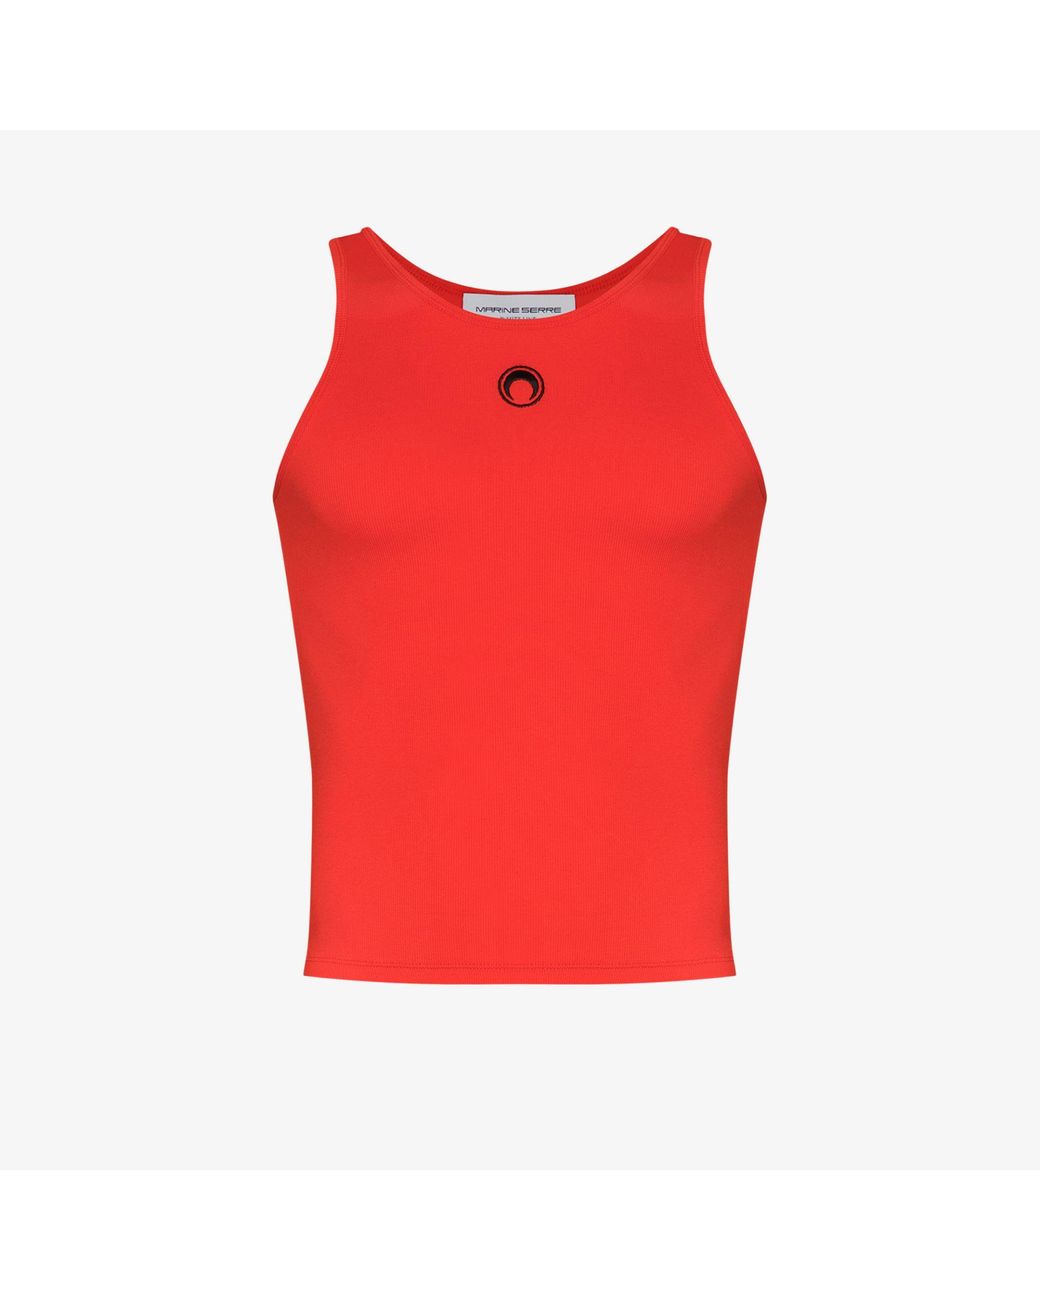 Marine Serre Cotton X Browns Crescent Moon Tank Top in Red for Men - Lyst